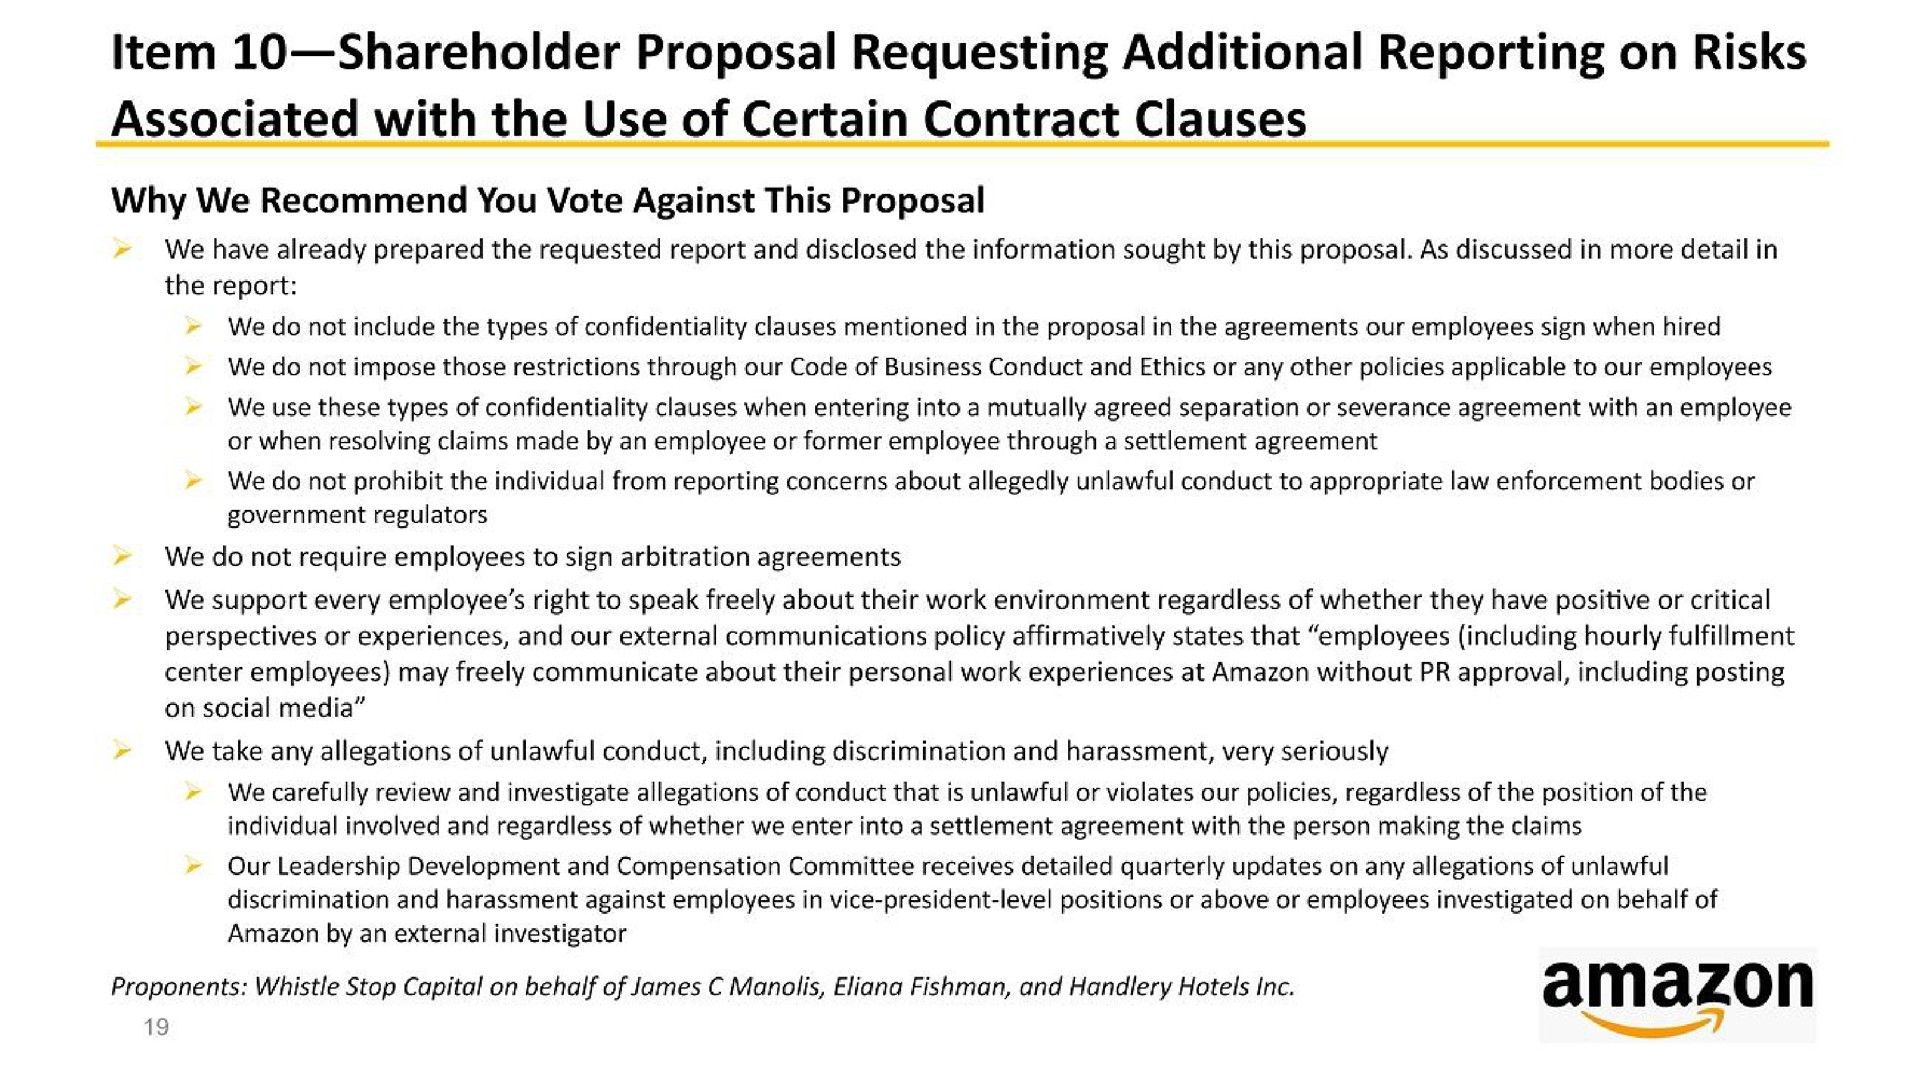 item shareholder proposal requesting additional reporting on risks associated with the use of certain contract clauses | Amazon